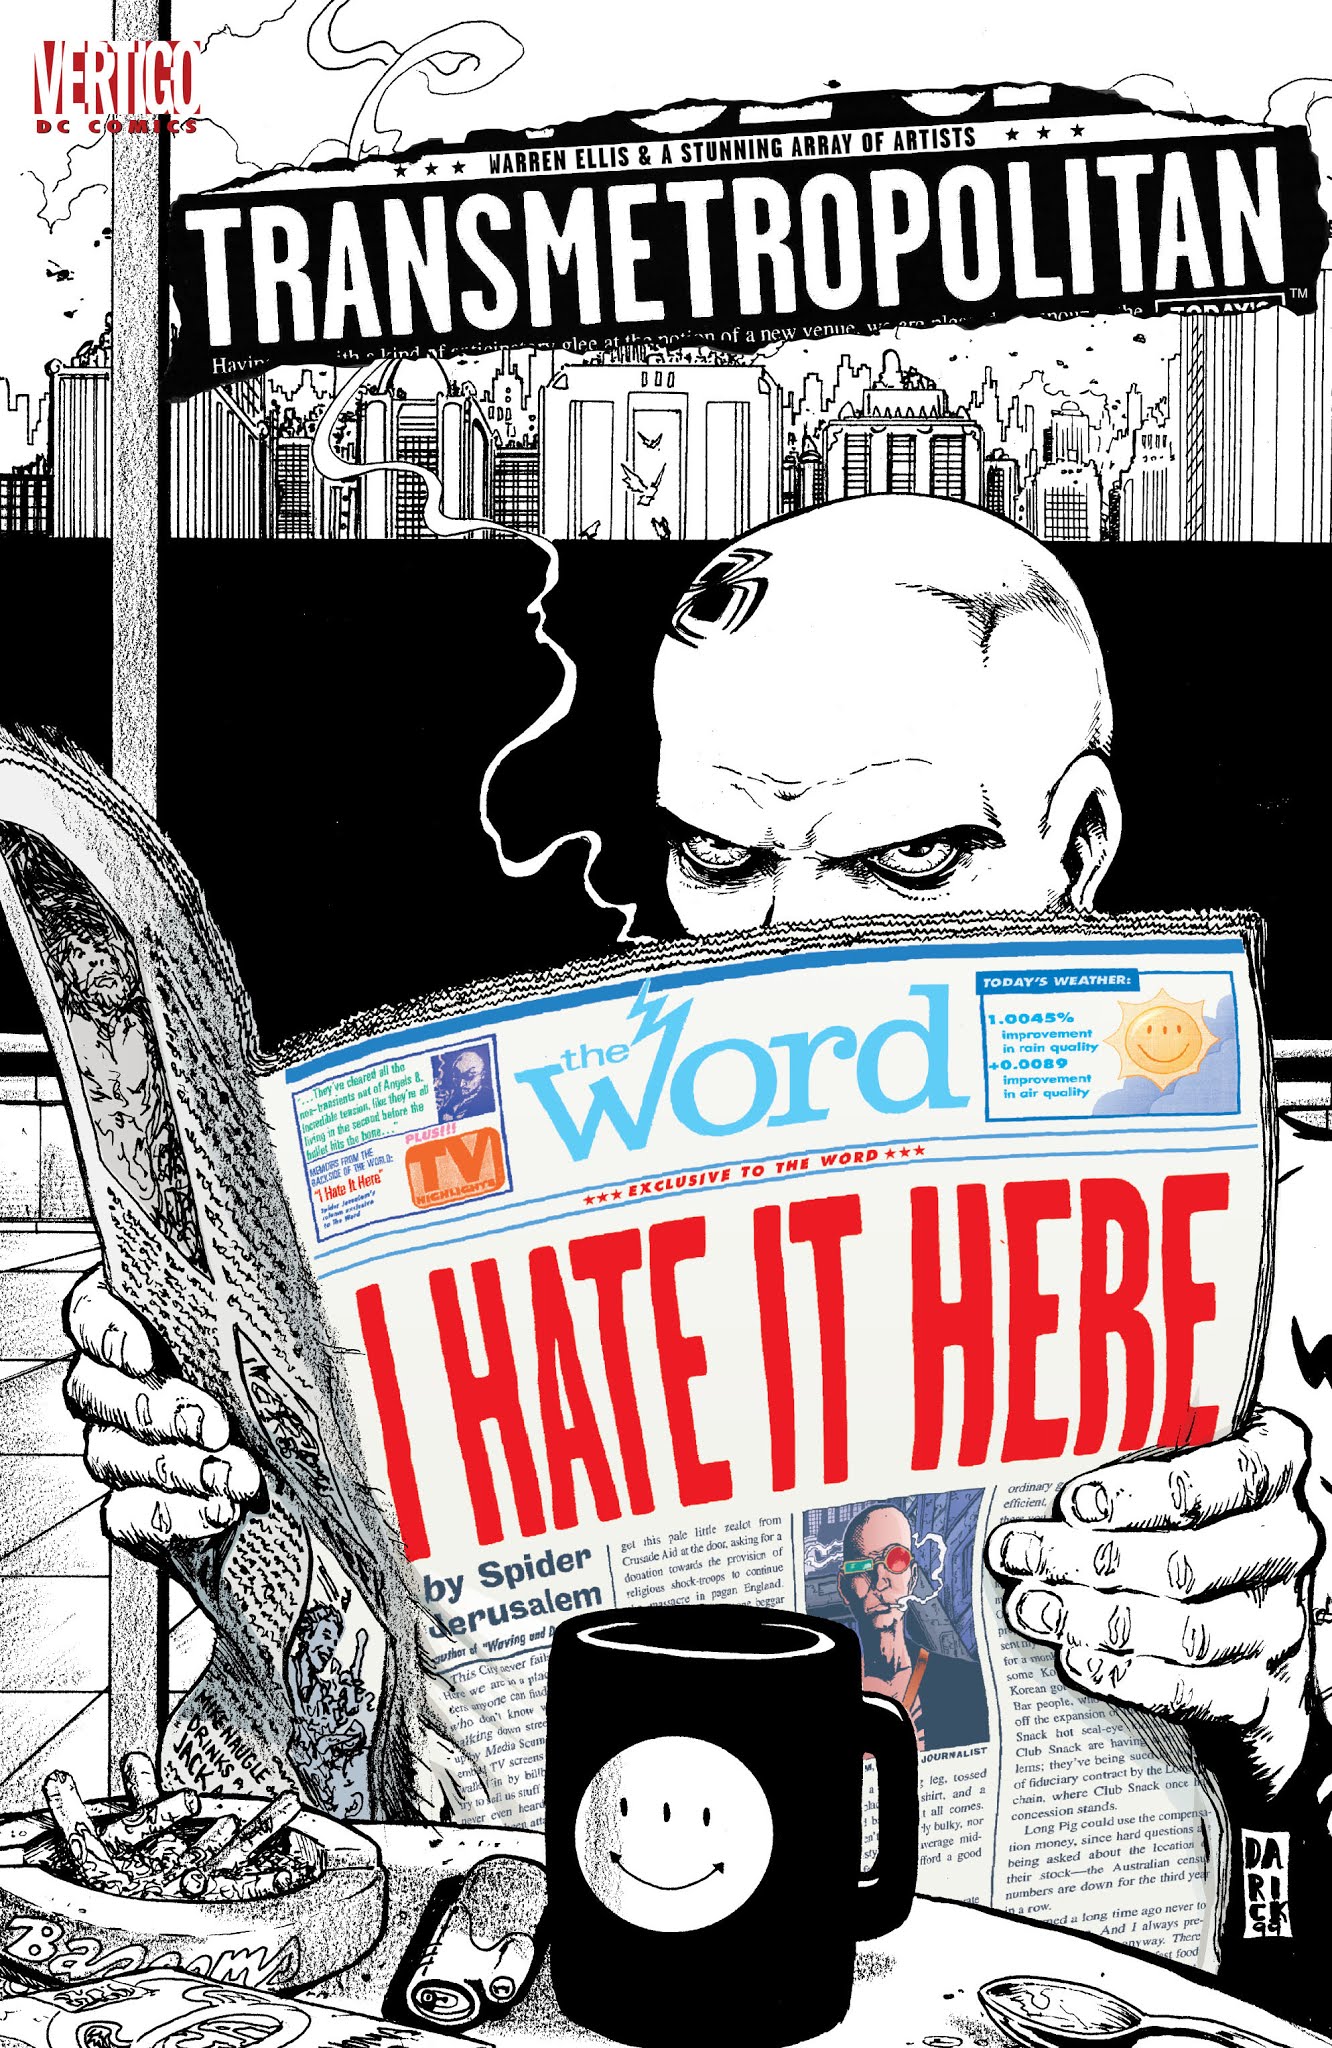 Read online Transmetropolitan comic -  Issue # Issue I Hate It Here - 1